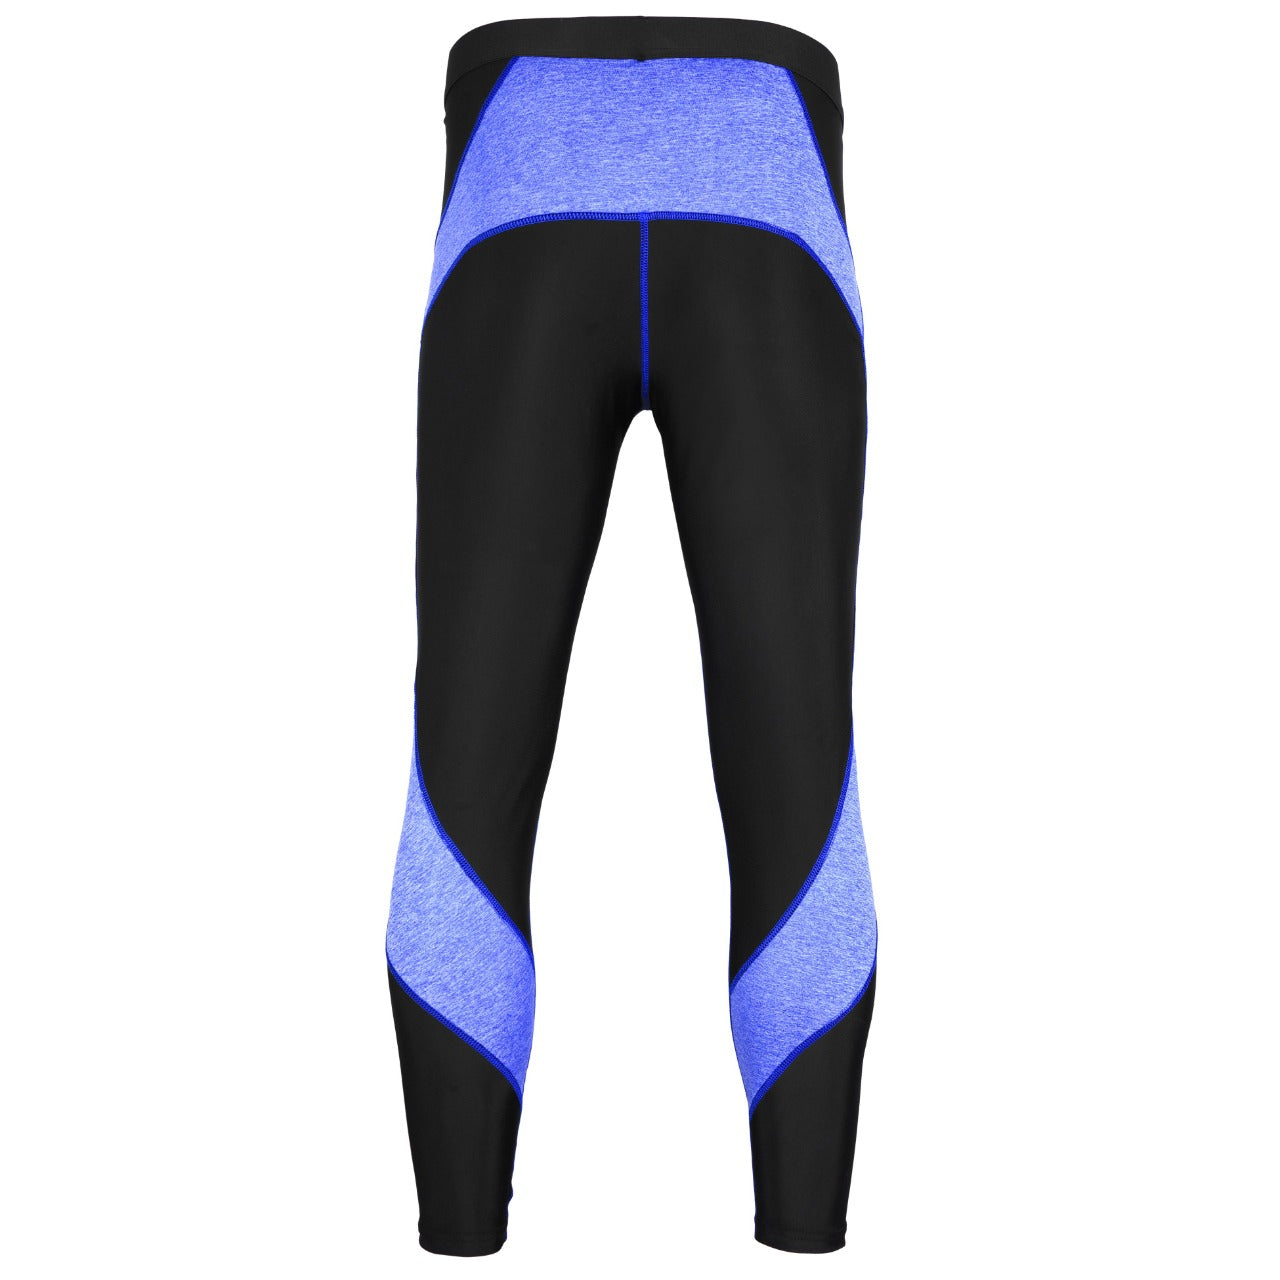 Hot New Sports Apparel Skin Tights Compression Base Men's Running